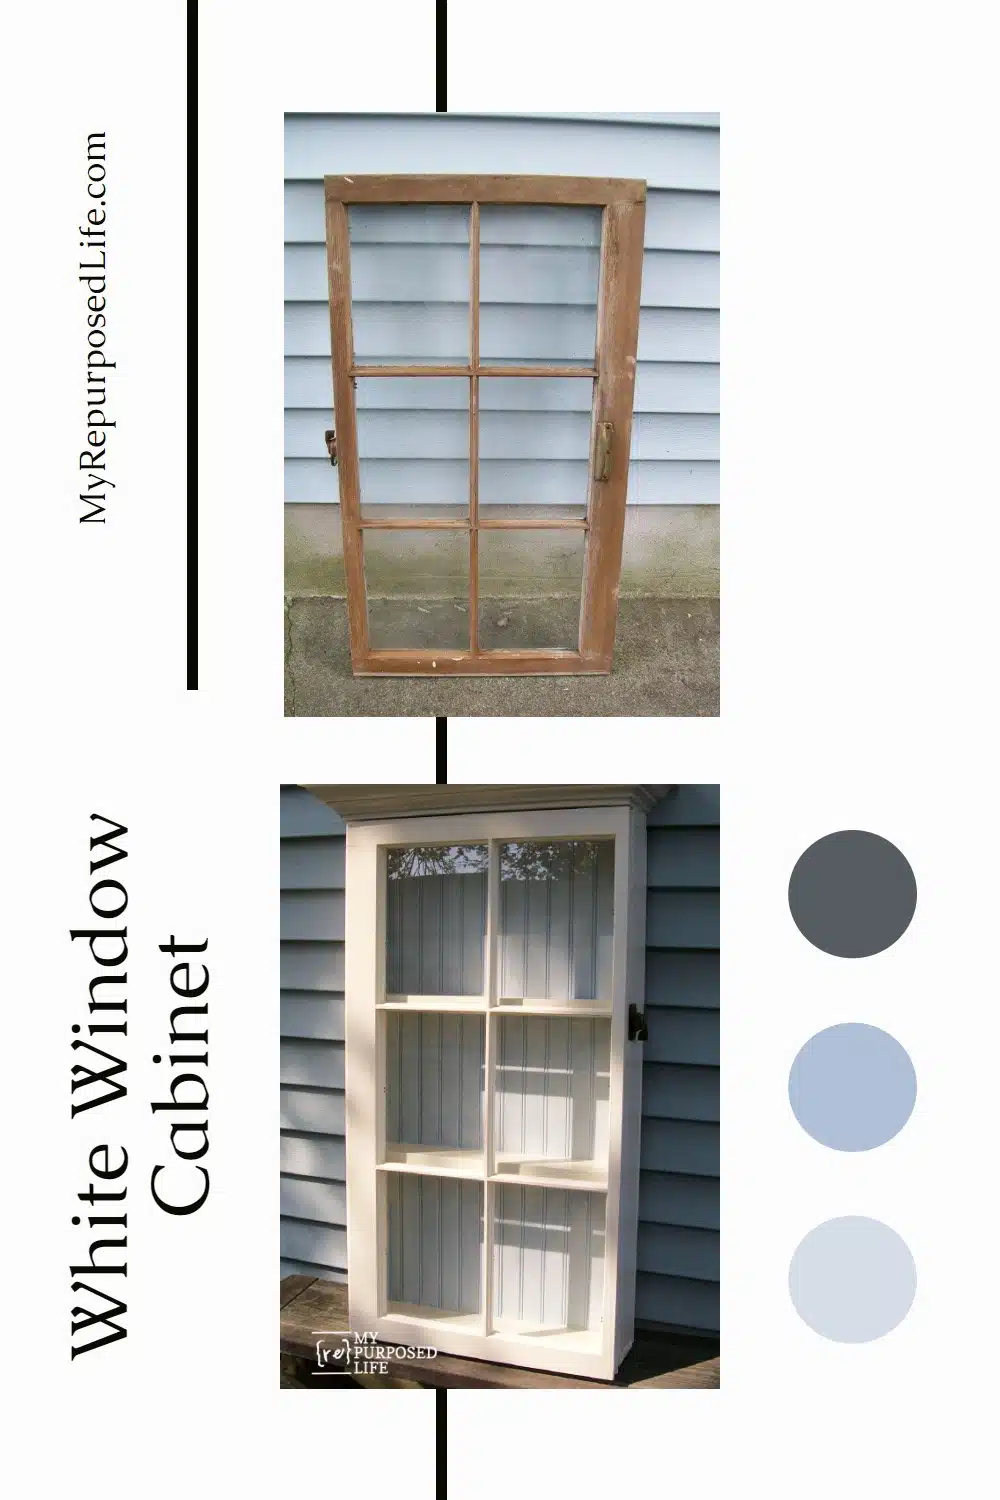 How to make a repurposed window cabinet using an old window and a shelf as crown molding. Step by step picture tutorial using reclaimed bits and pieces. #MyRepurposedLife #upcycle #window #cabinet #project via @repurposedlife